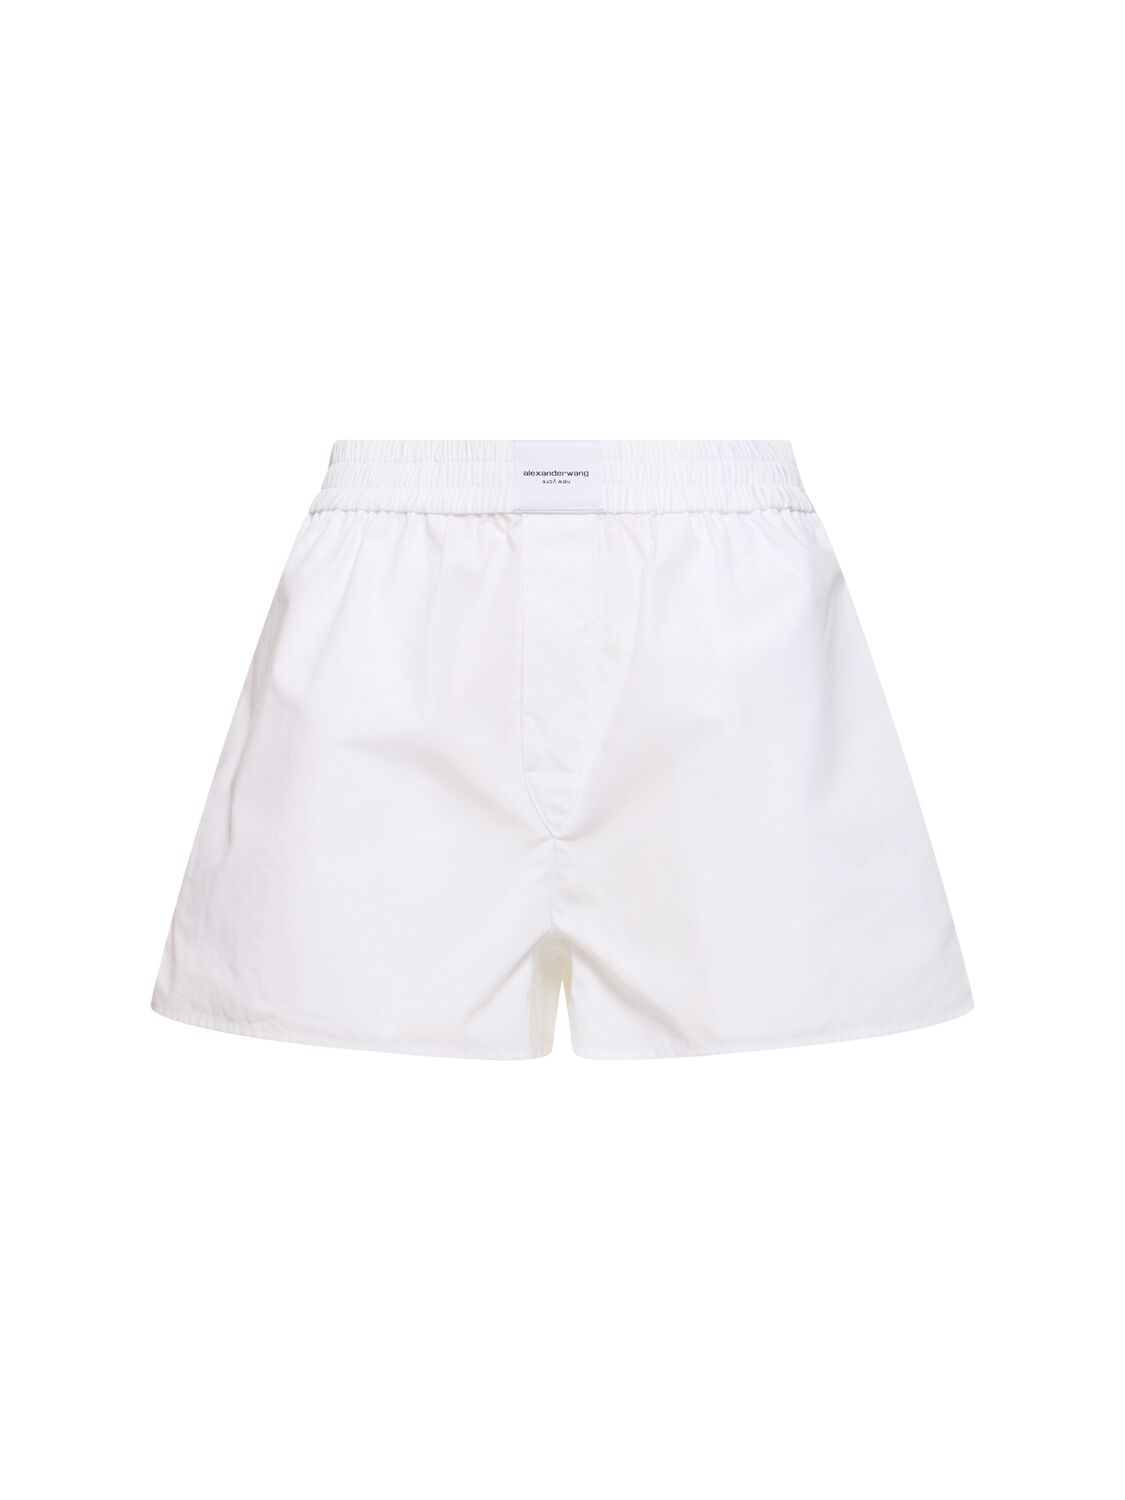 Alexander Wang Classic Cotton Boxer Shorts In White